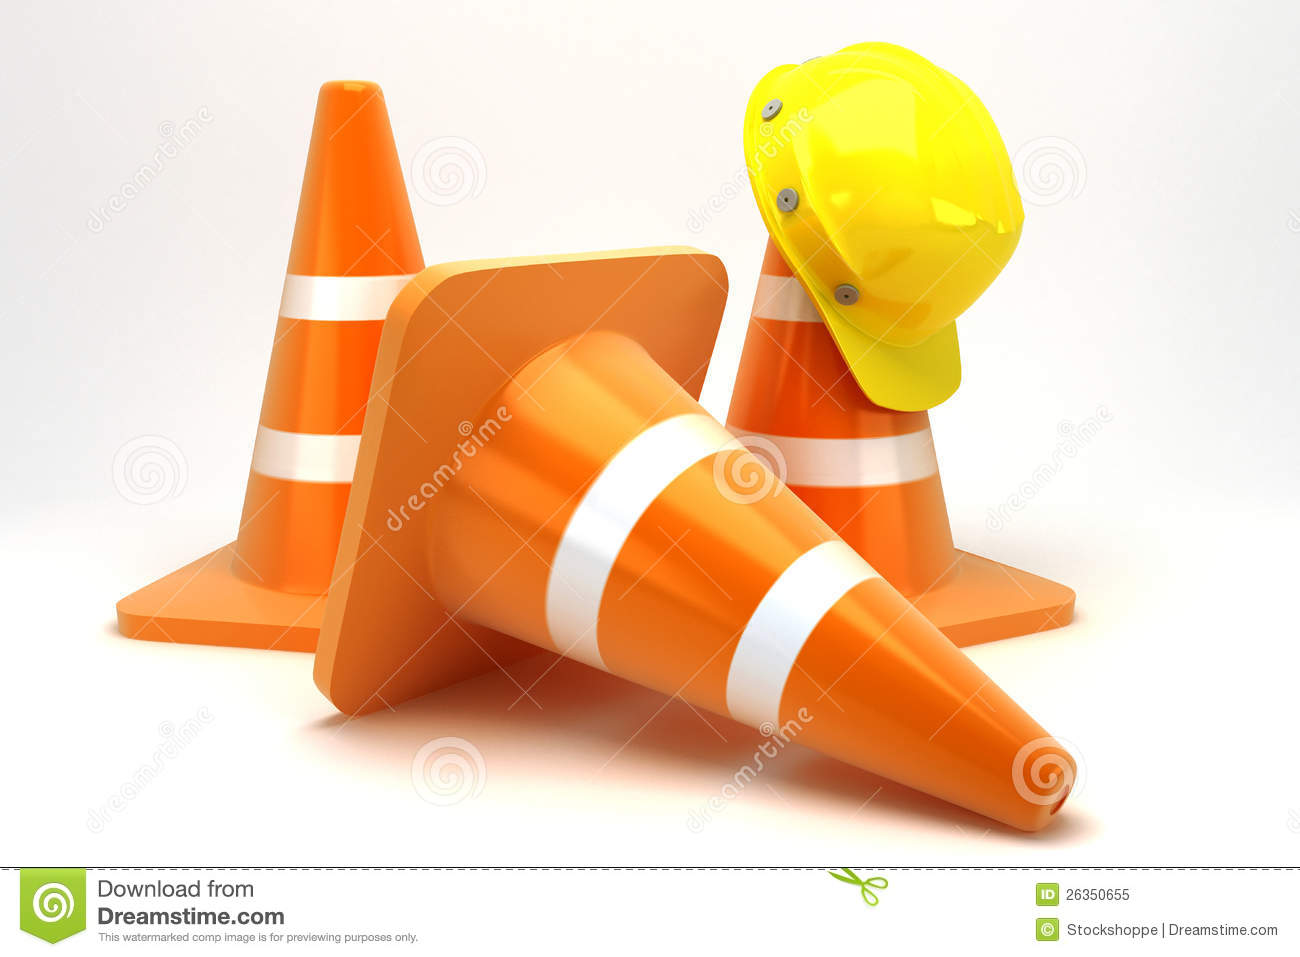 Construction Cone With Hard Hat Royalty Free Stock Photo   Image    